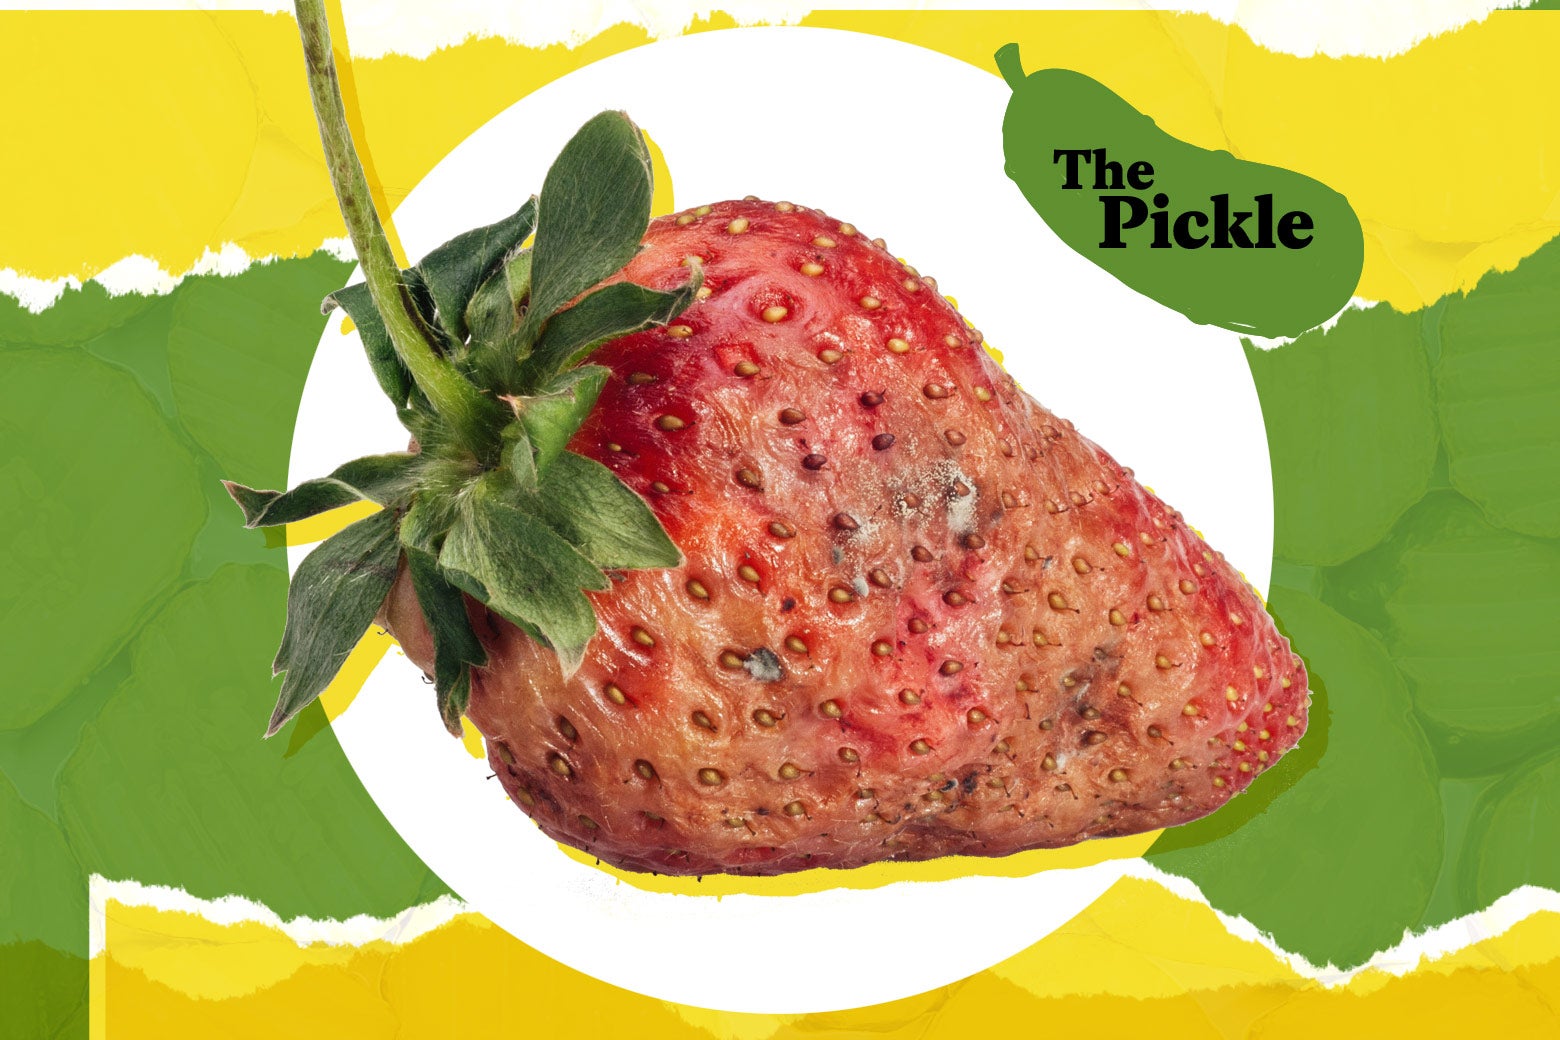 Strawberry on plate with the Pickle logo.